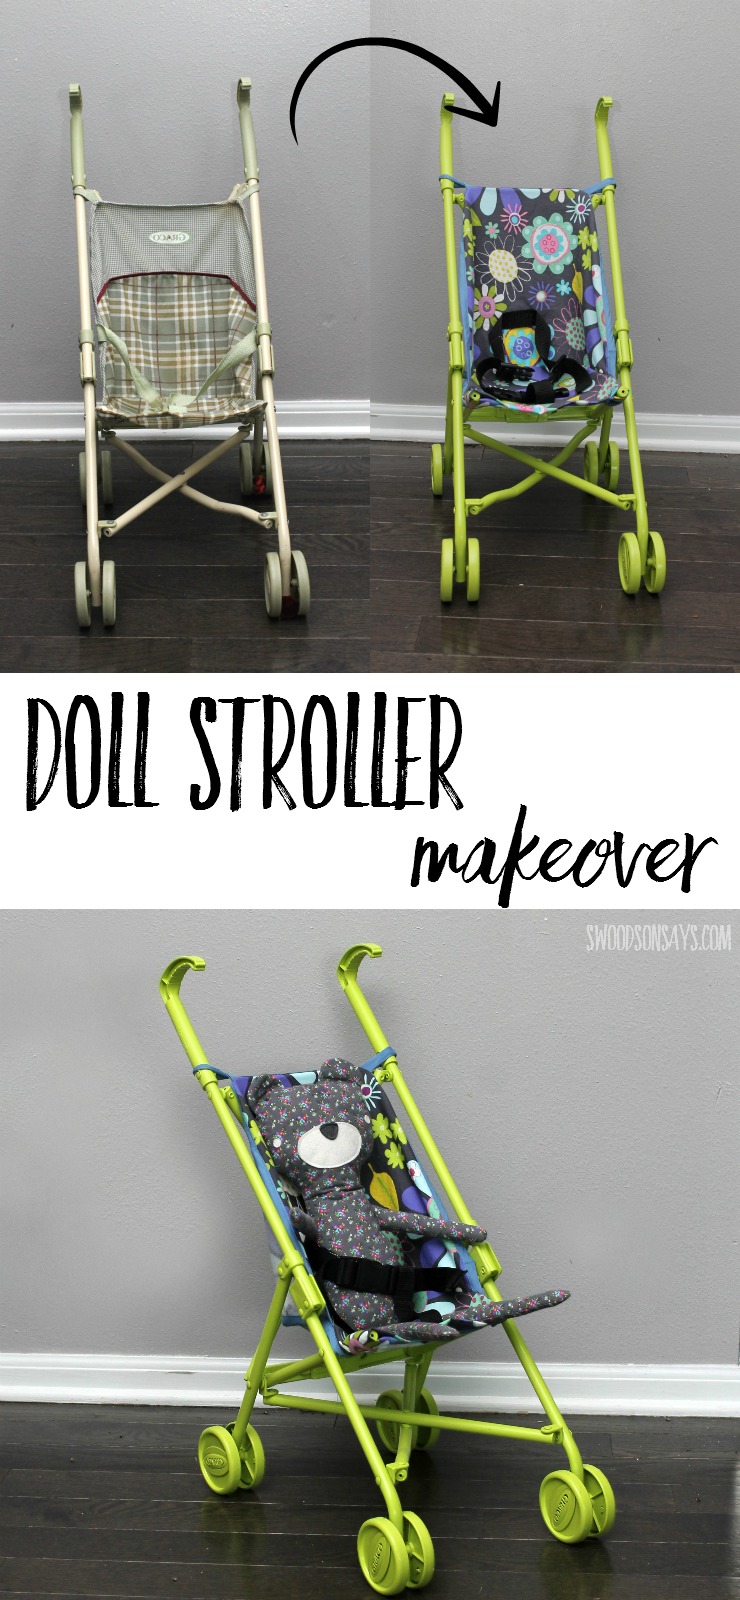 A thrift shop doll stroller gets a makeover into a colorful, modern version! See how paint and fresh fabric can transform a dated toy.